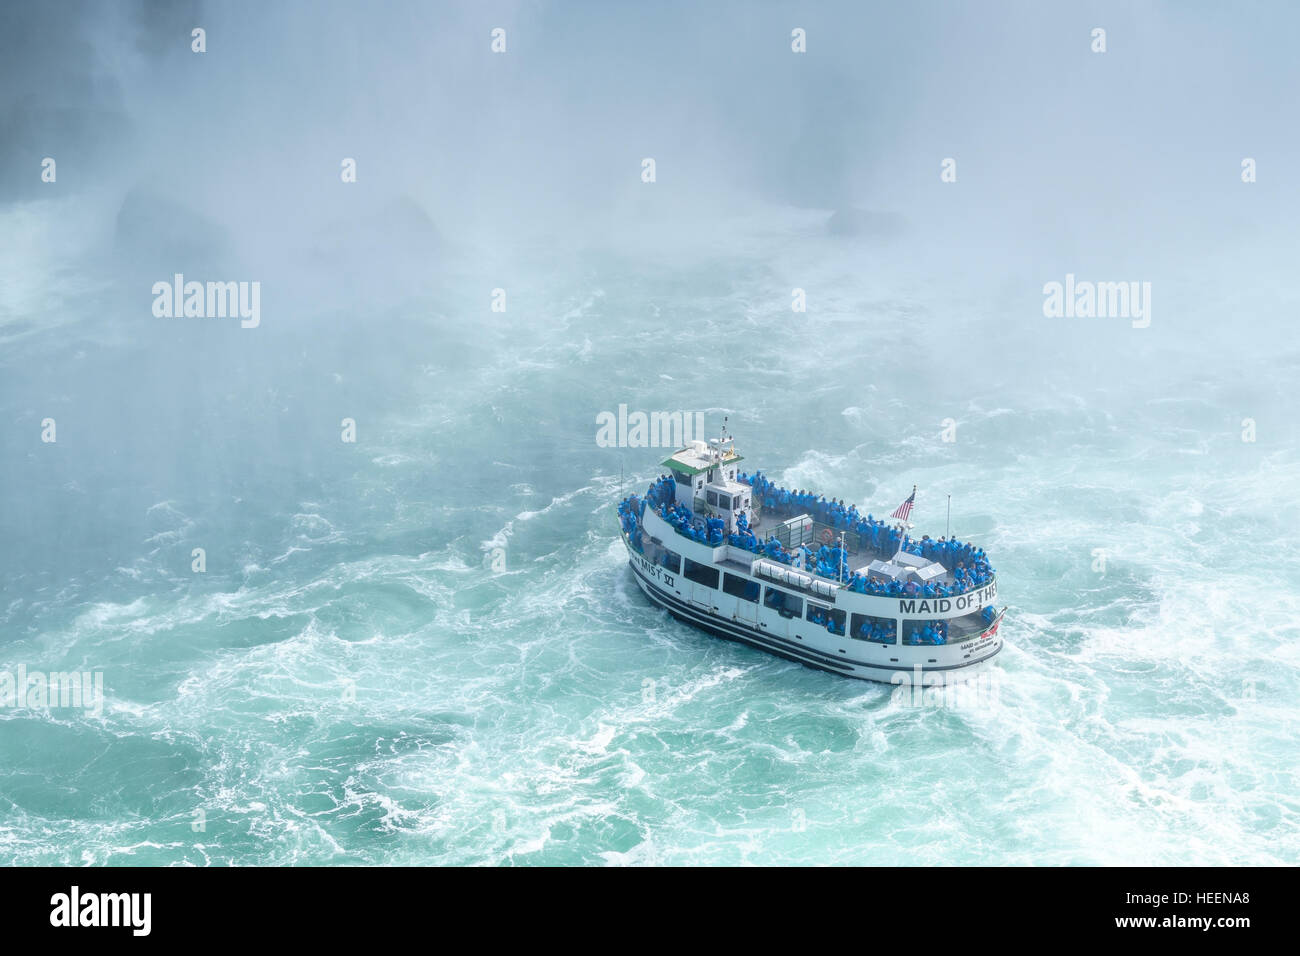 The Maid In The Mist boat cruises in the spray of Niagara Falls. Stock Photo